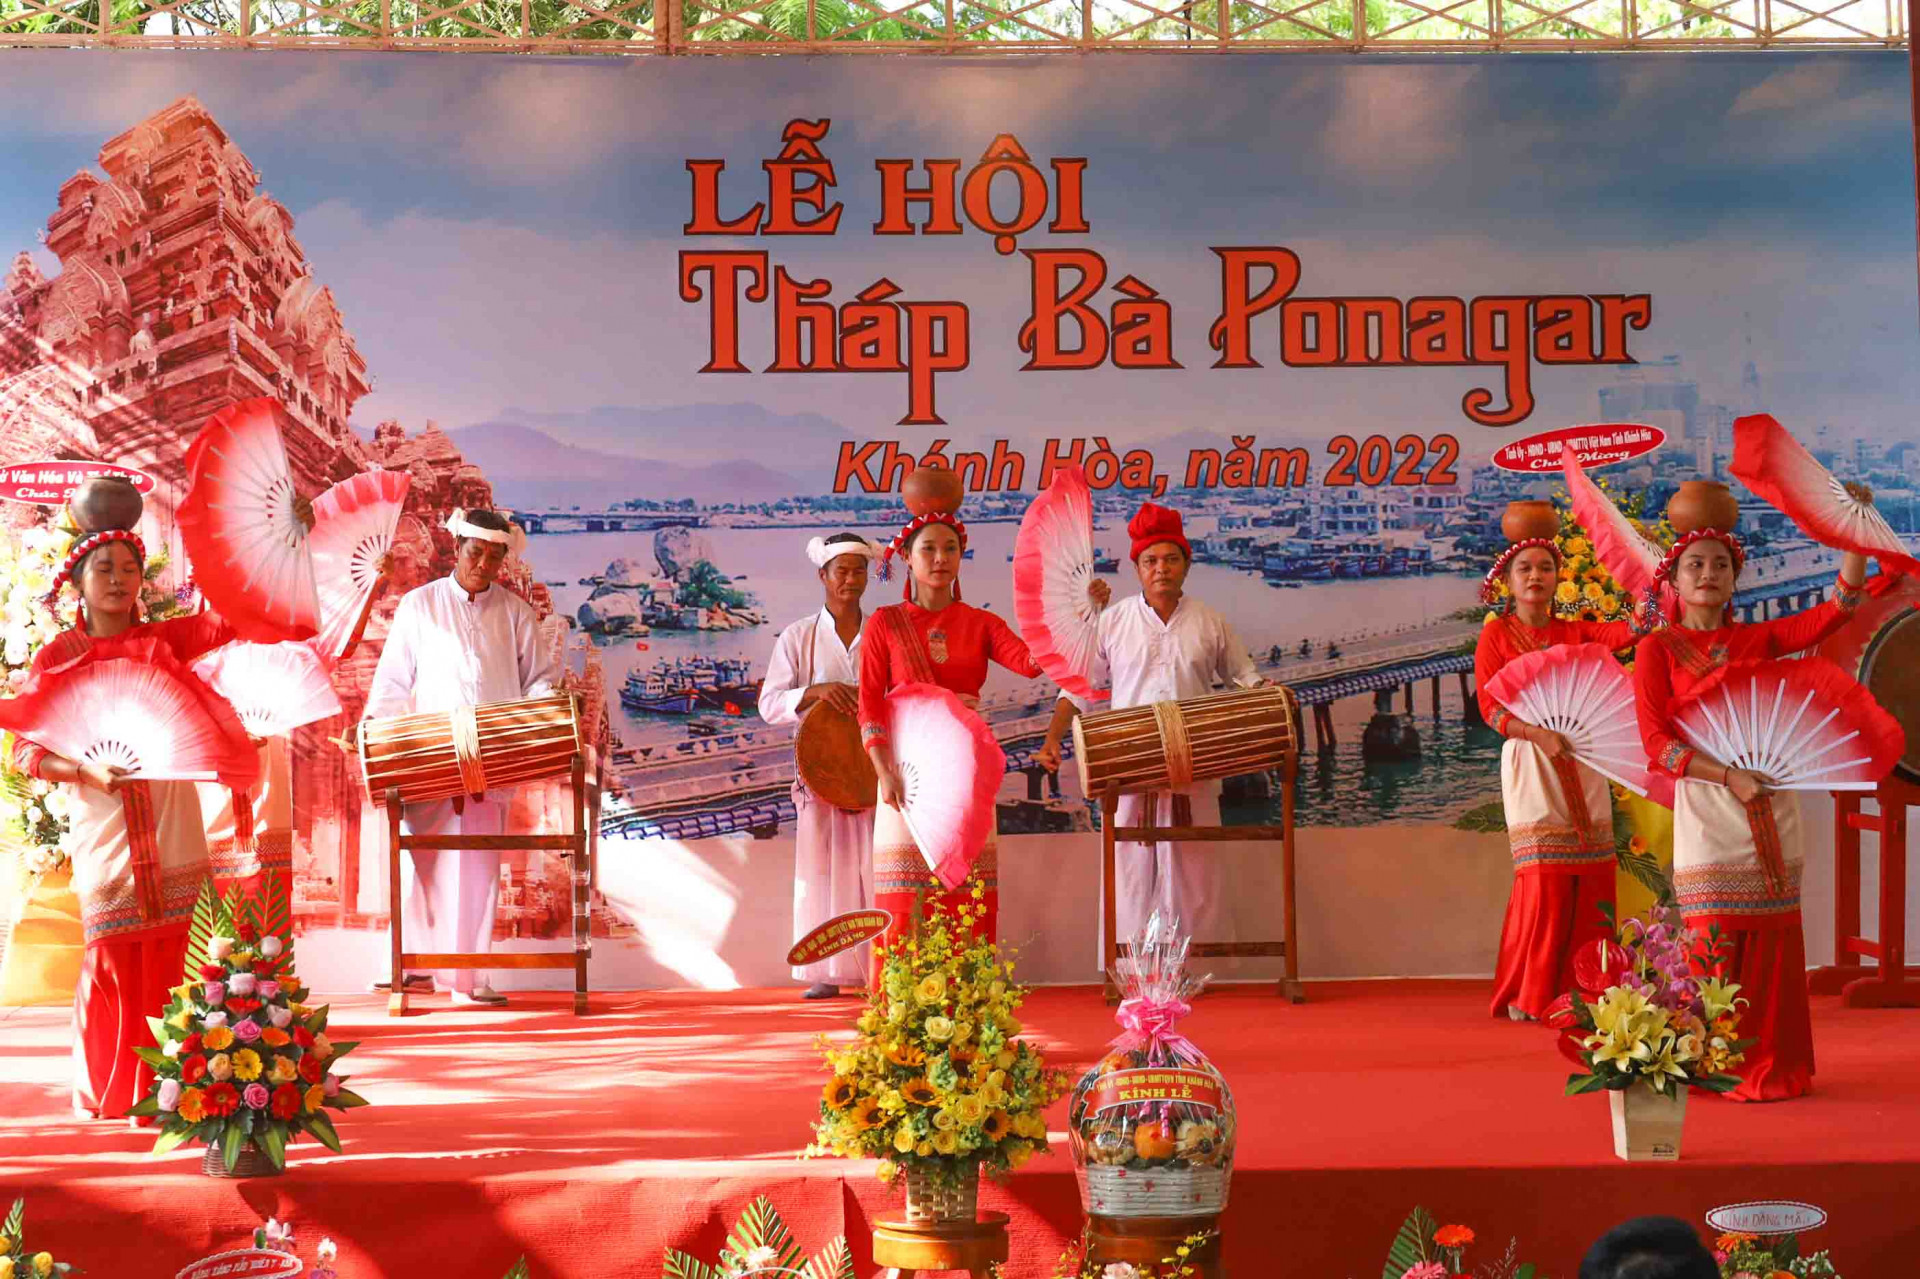 Cham dance at opening ceremony of Ponagar Temple Festival 2022